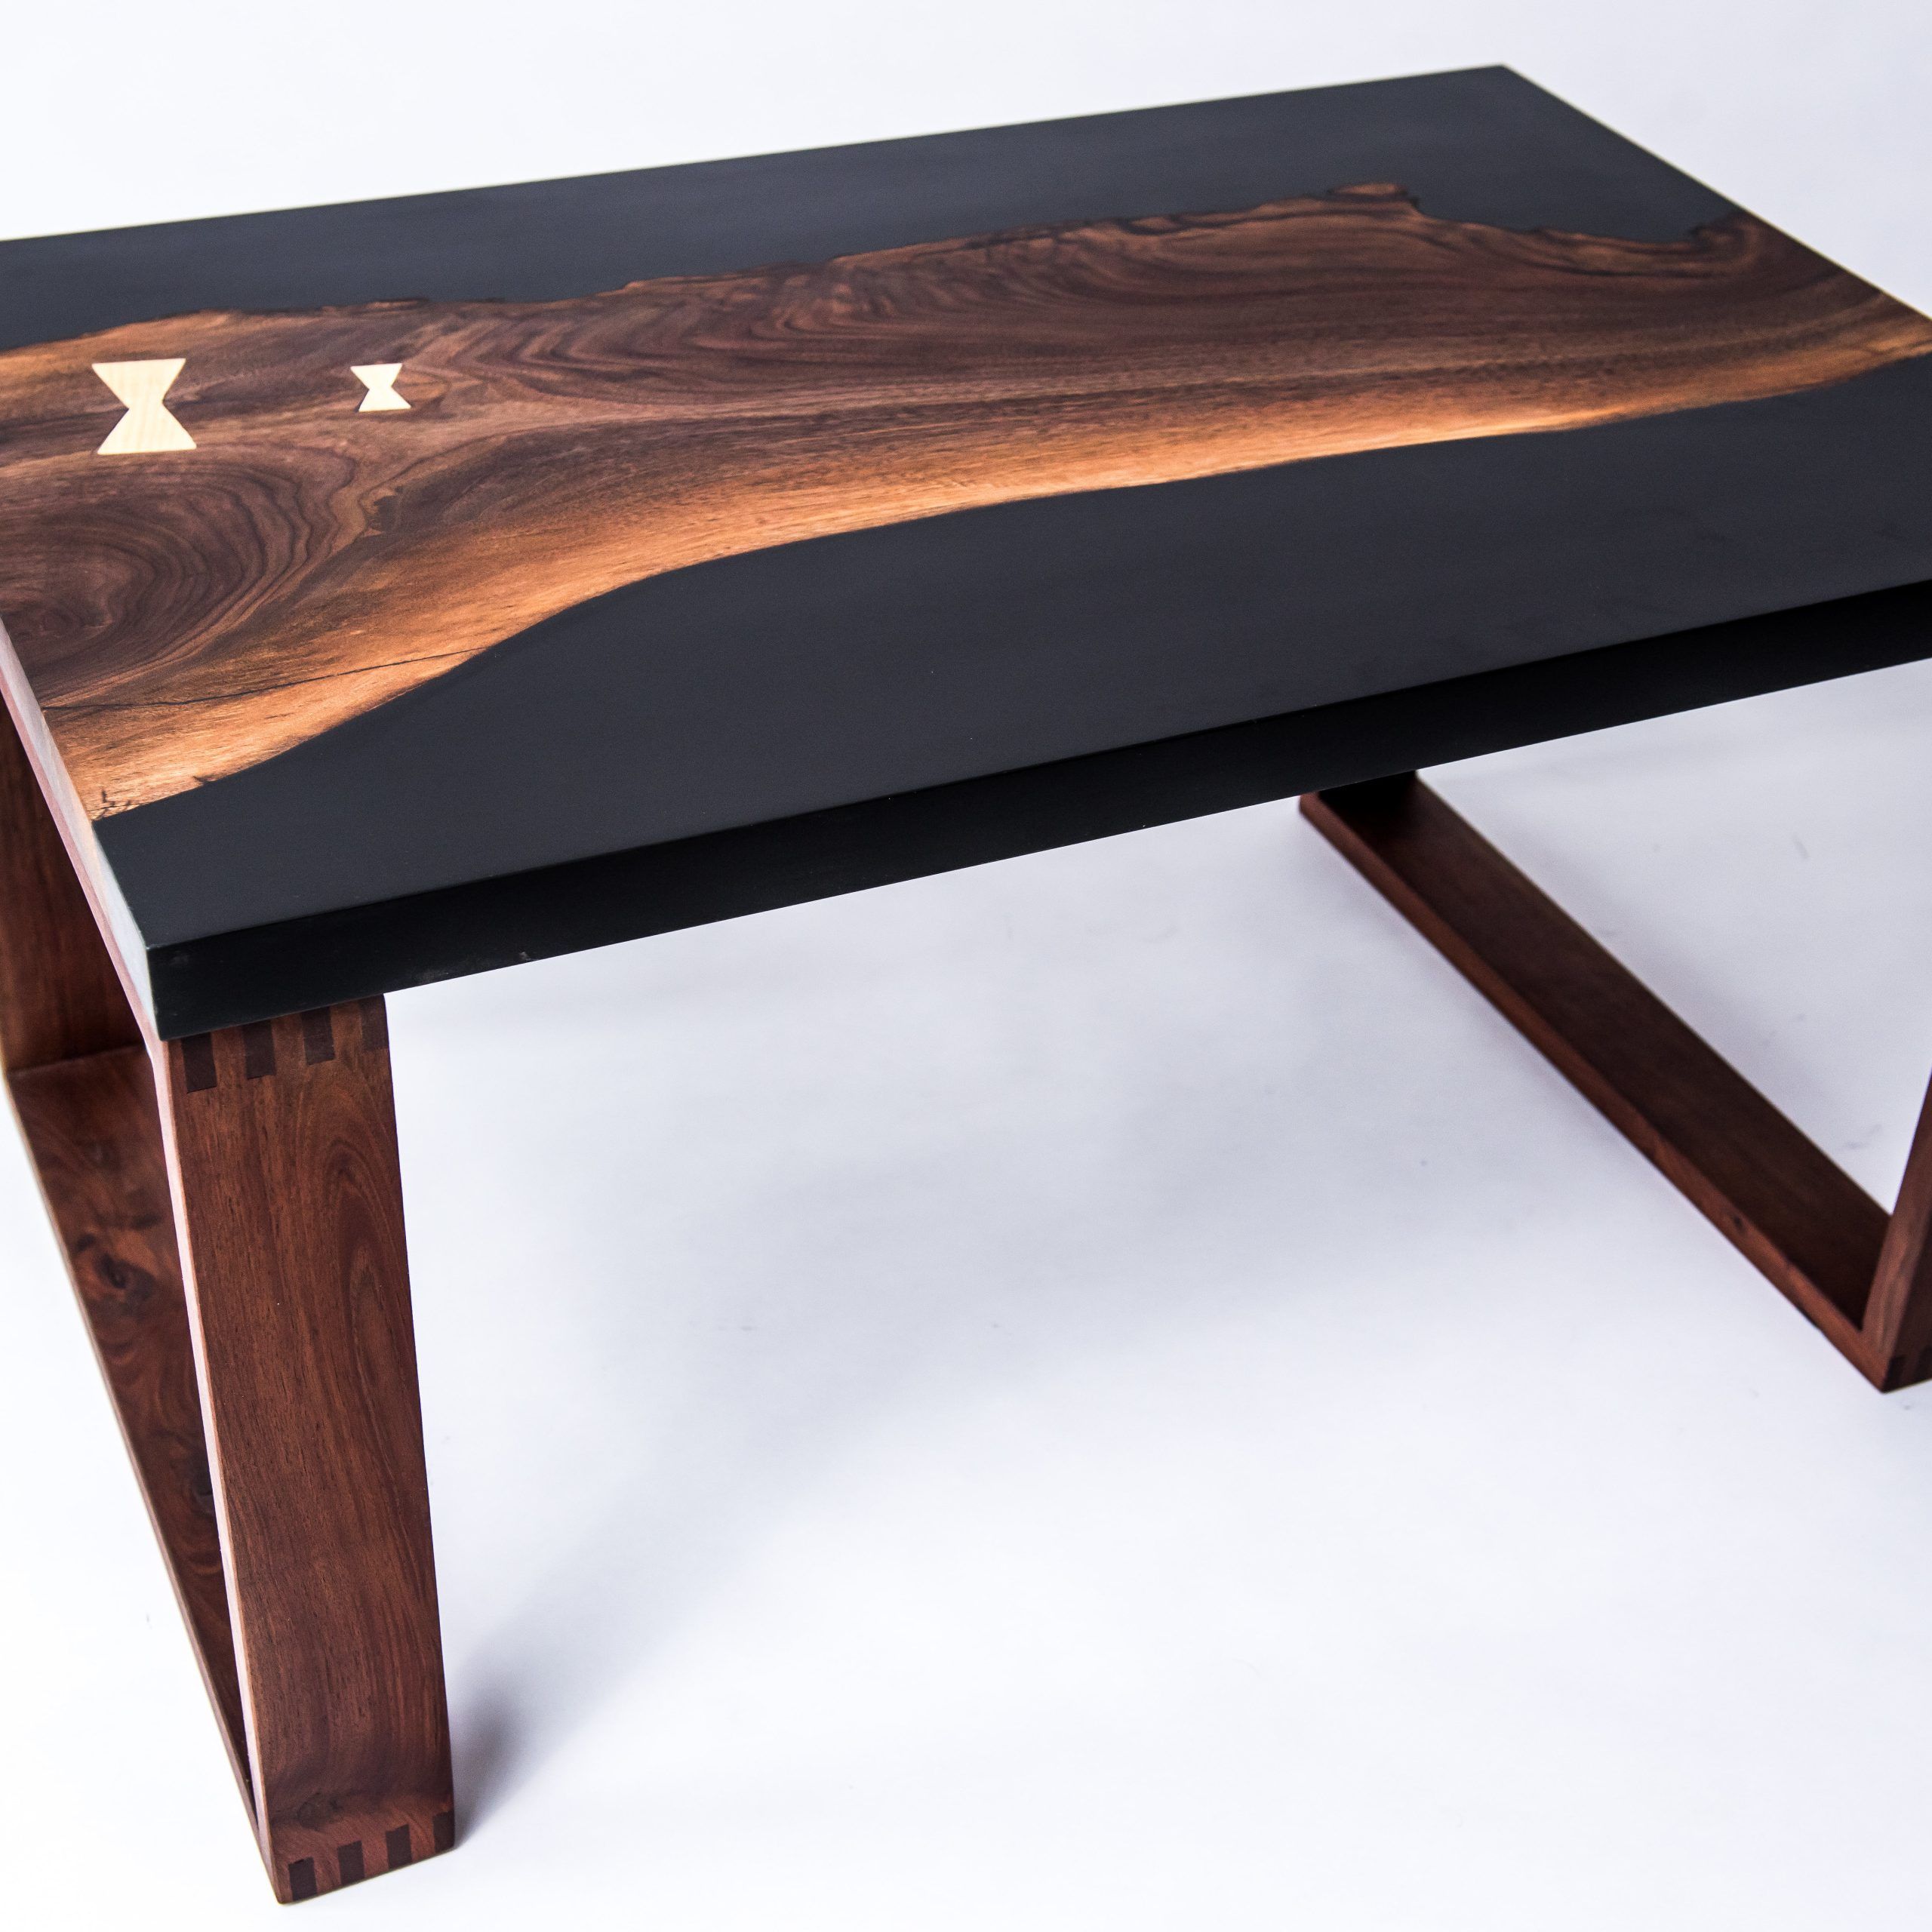 Fashionable Black Walnut Resin Cast Coffee Table Pertaining To Walnut Coffee Tables (View 9 of 20)